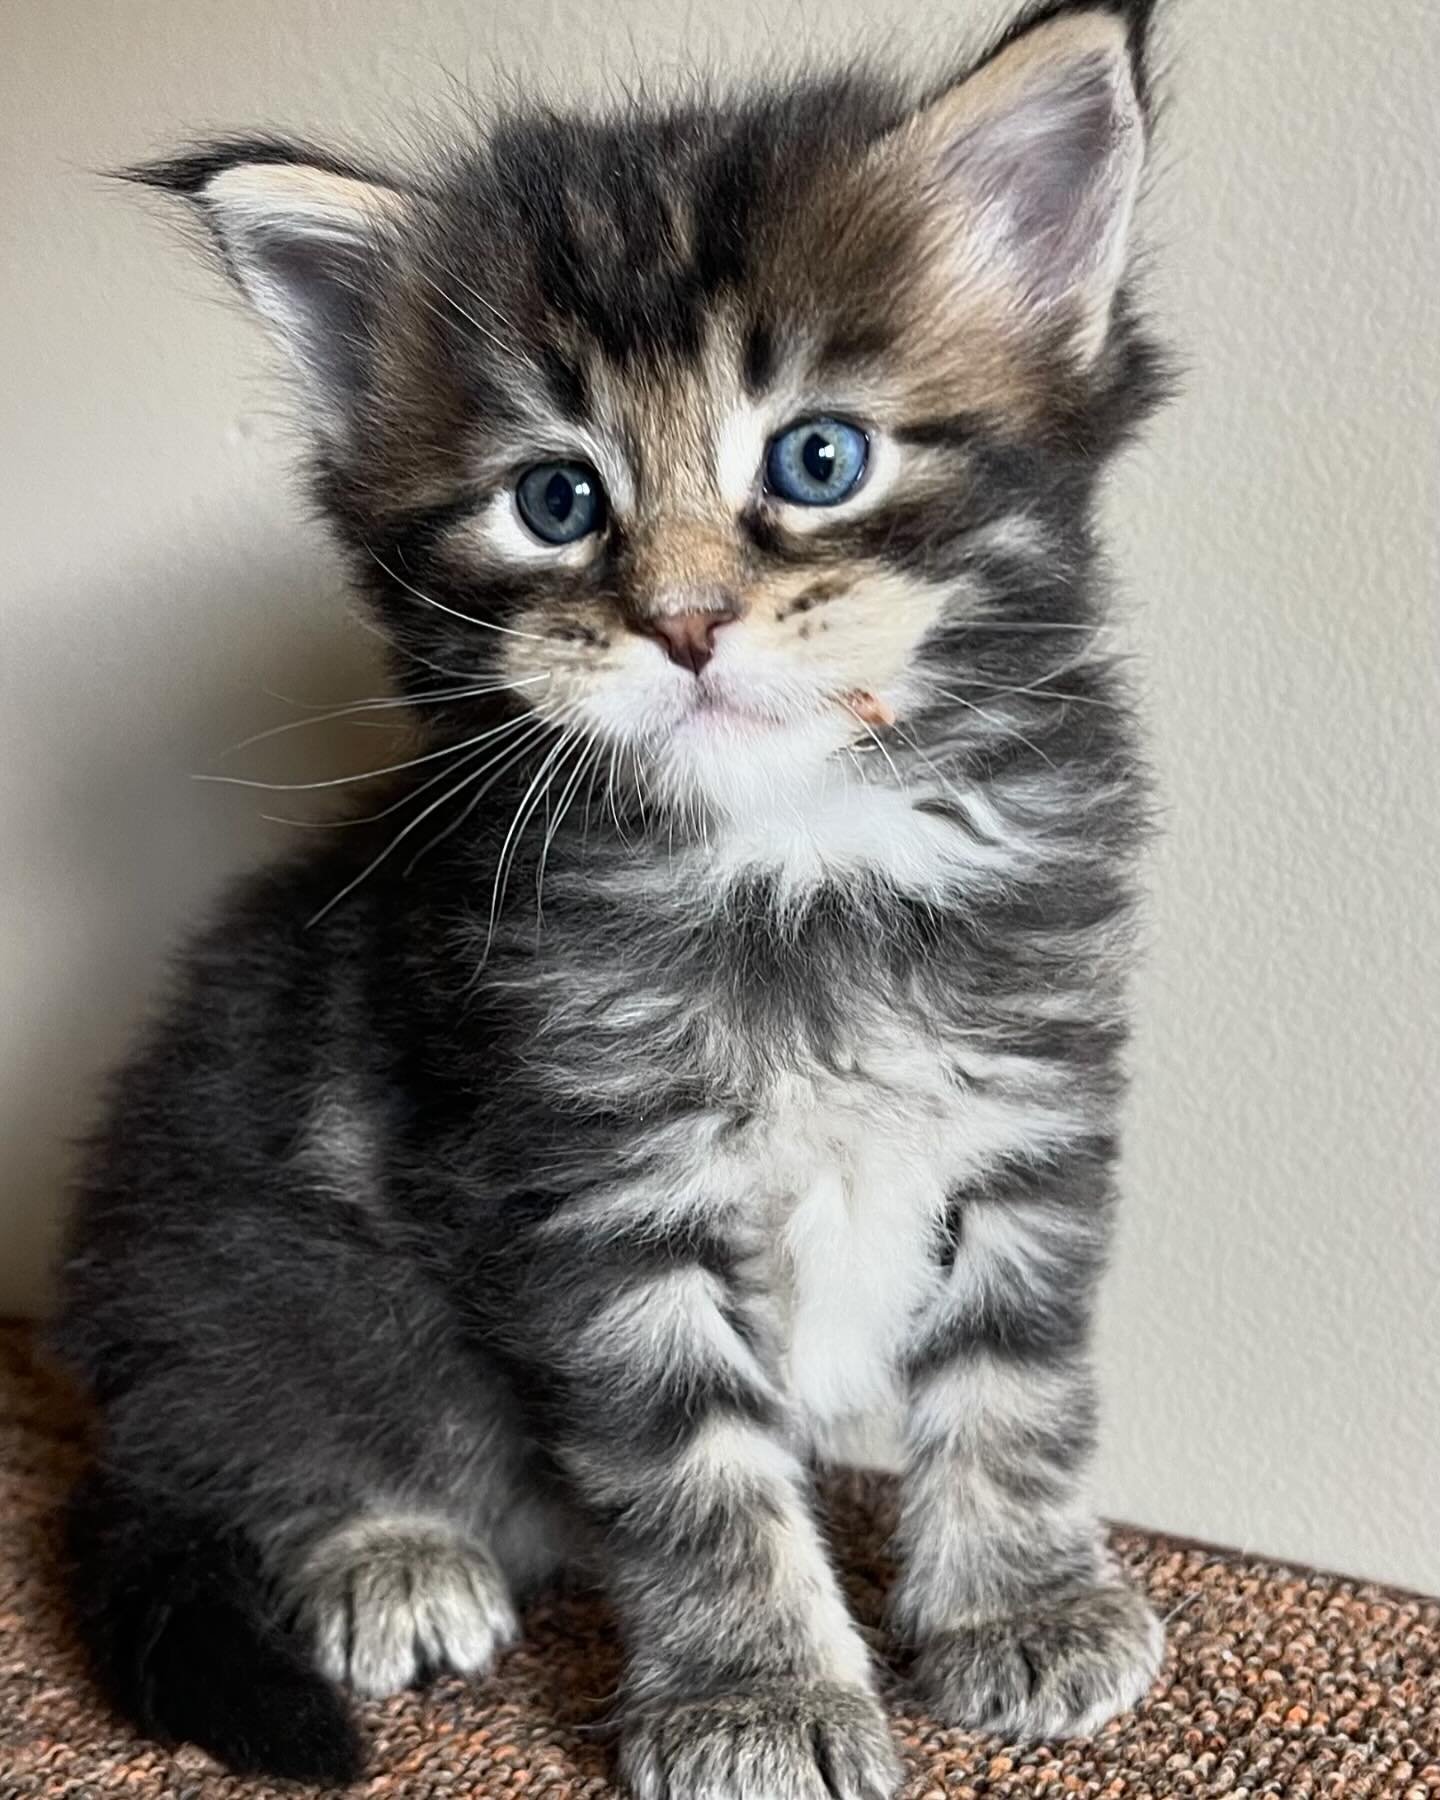 ✨FEATURED KITTEN✨
High Country Maine Coons &ldquo;Viggo&rdquo;
Black classic tabby ~ Male
&bull;
This handsome boy is looking for his FURever home!
&bull; 
LINK IN BIO TO INQUIRE!

#mainecoon #mainecoons #mainecooncat #mainecoonlovers #bigcats #large